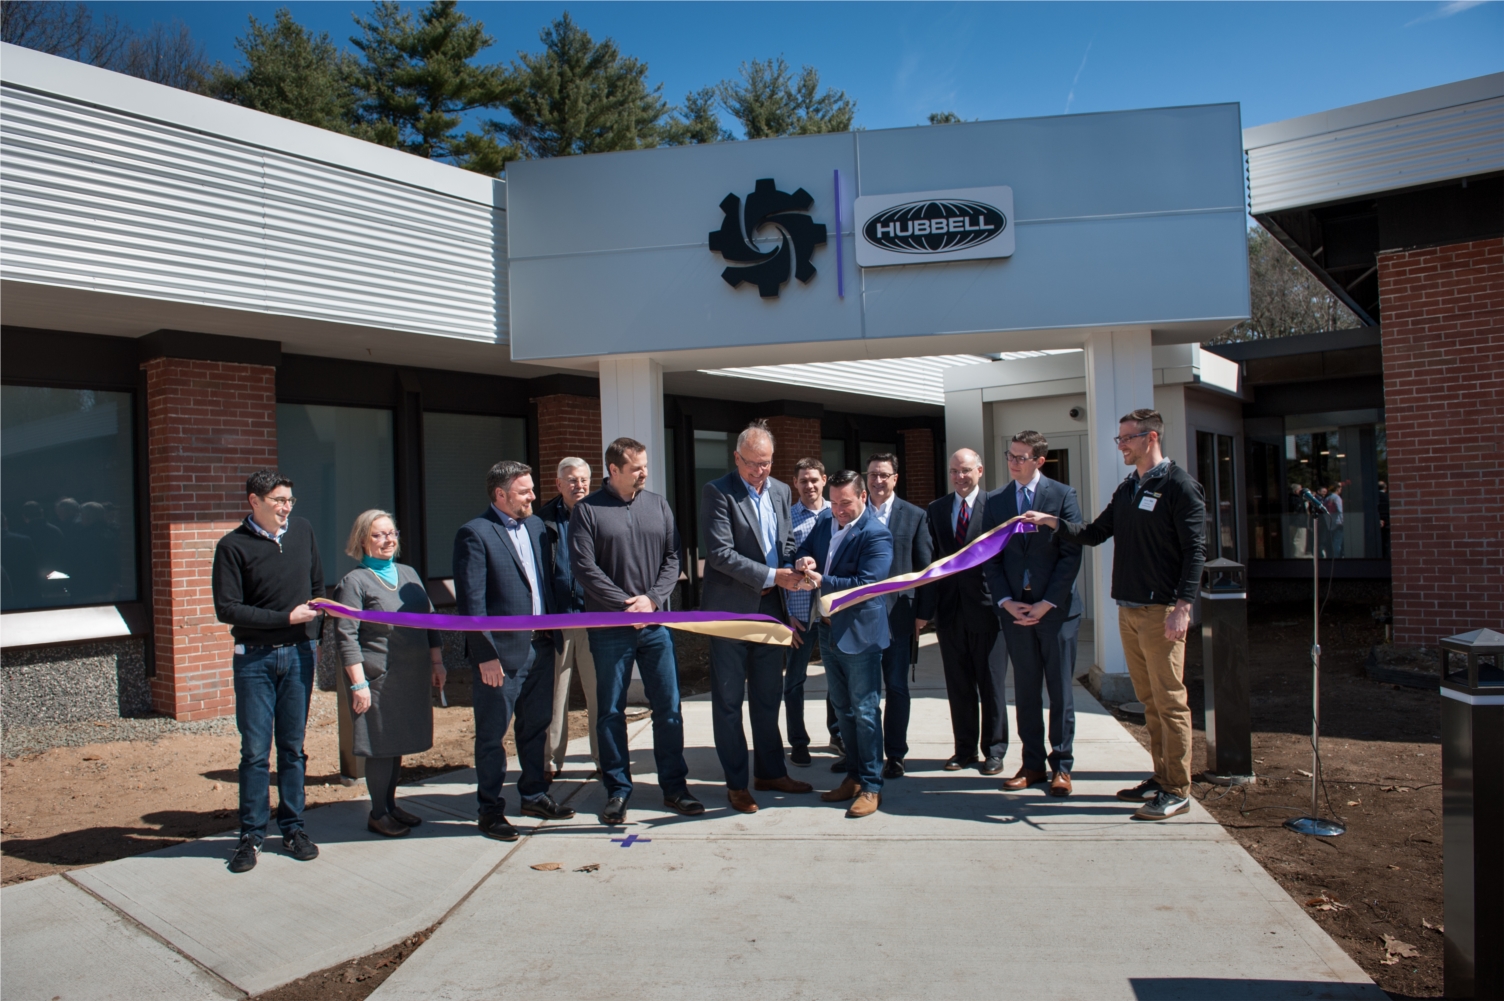 iDevices President Chris Allen (at right, cutting ribbon) and Hubbell Incorporated Chairman and CEO David Nord (at left, cutting ribbon) cut the ceremonial ribbon during the grand opening event for iDevices' new headquarters in Avon on April 2, 2019. iDevices was acquired by Shelton-based Hubbell Incorporated in 2017. 